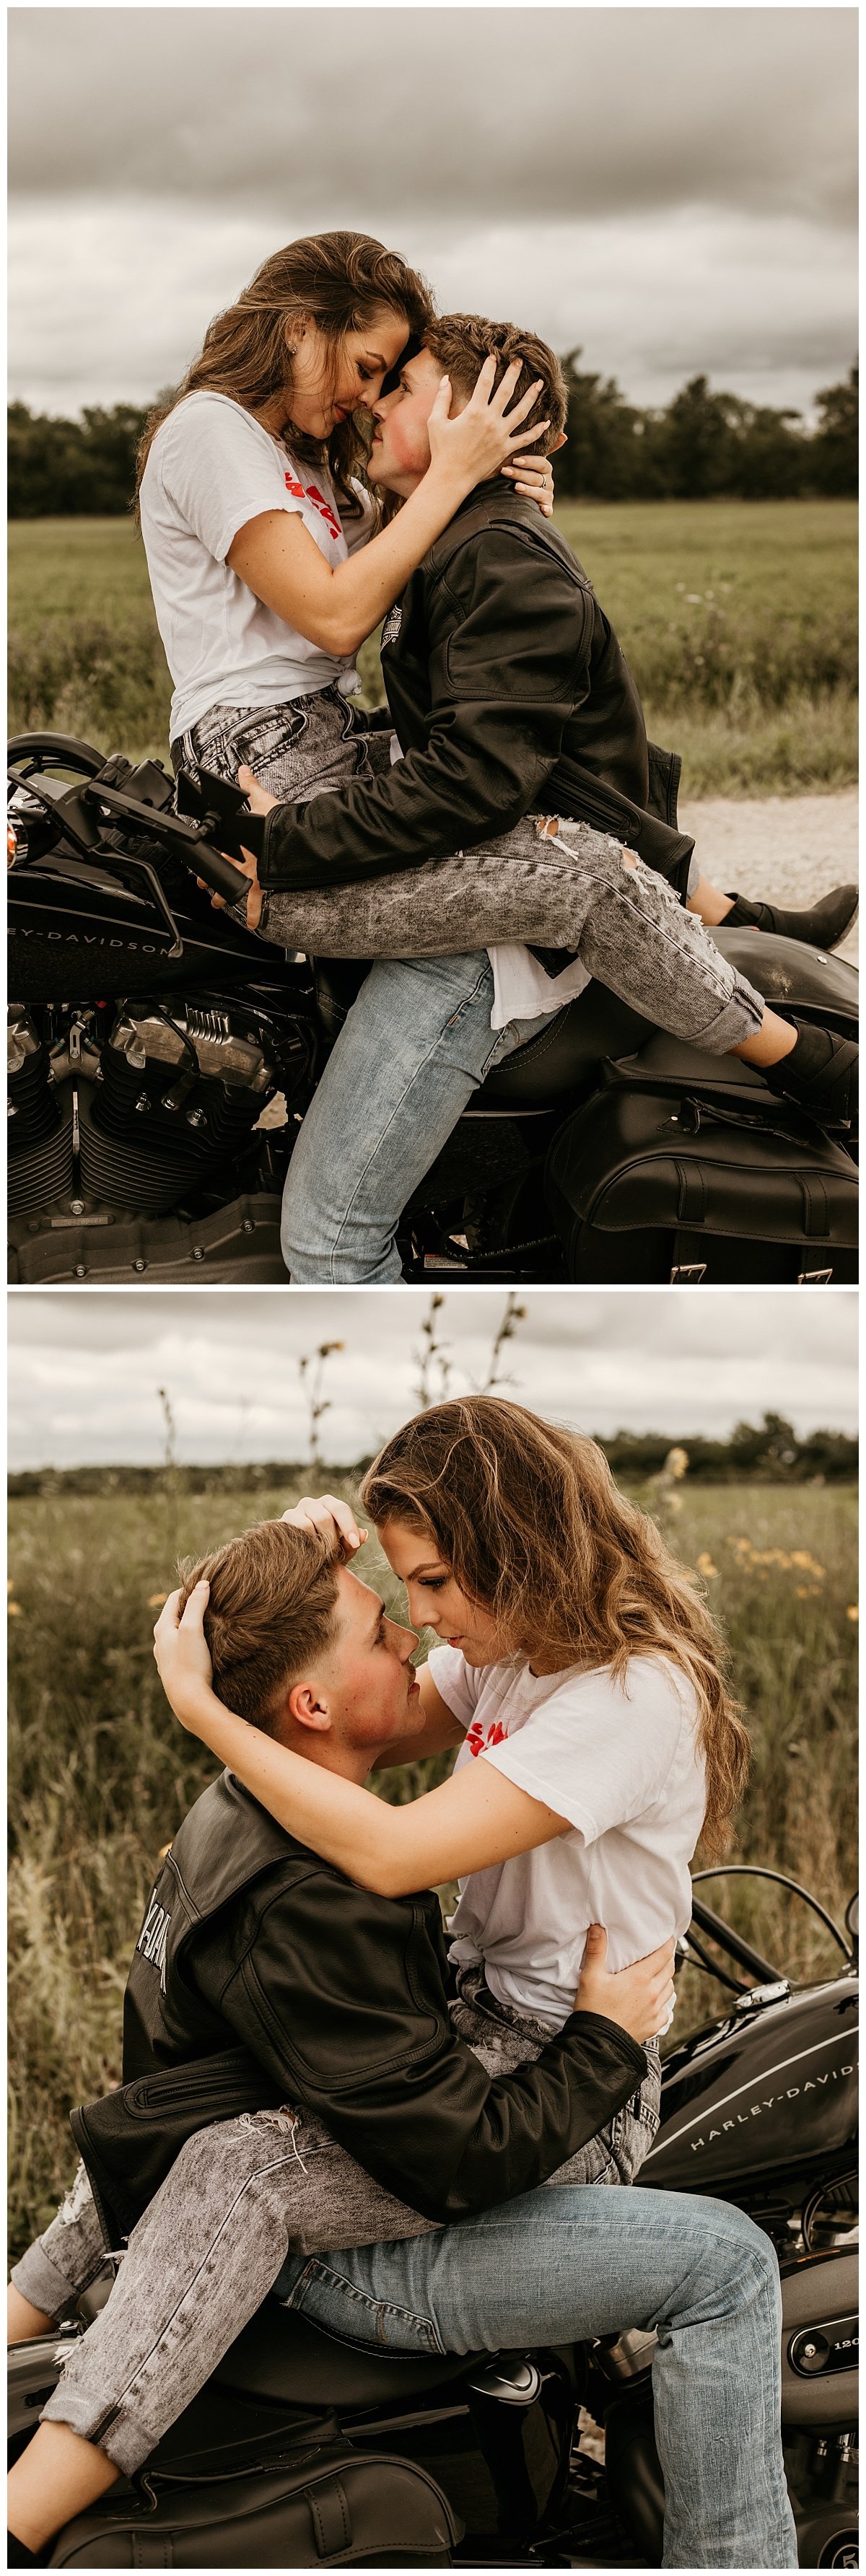 motorcycle+session+_+adventure+session+_+engagement+session+_+motorcycle+photos+_+lana+del+rey+_+ride+or+die+_+adventurous+couple+_+kansas+city+photographer+_+kansas+city+photography (2).jpeg